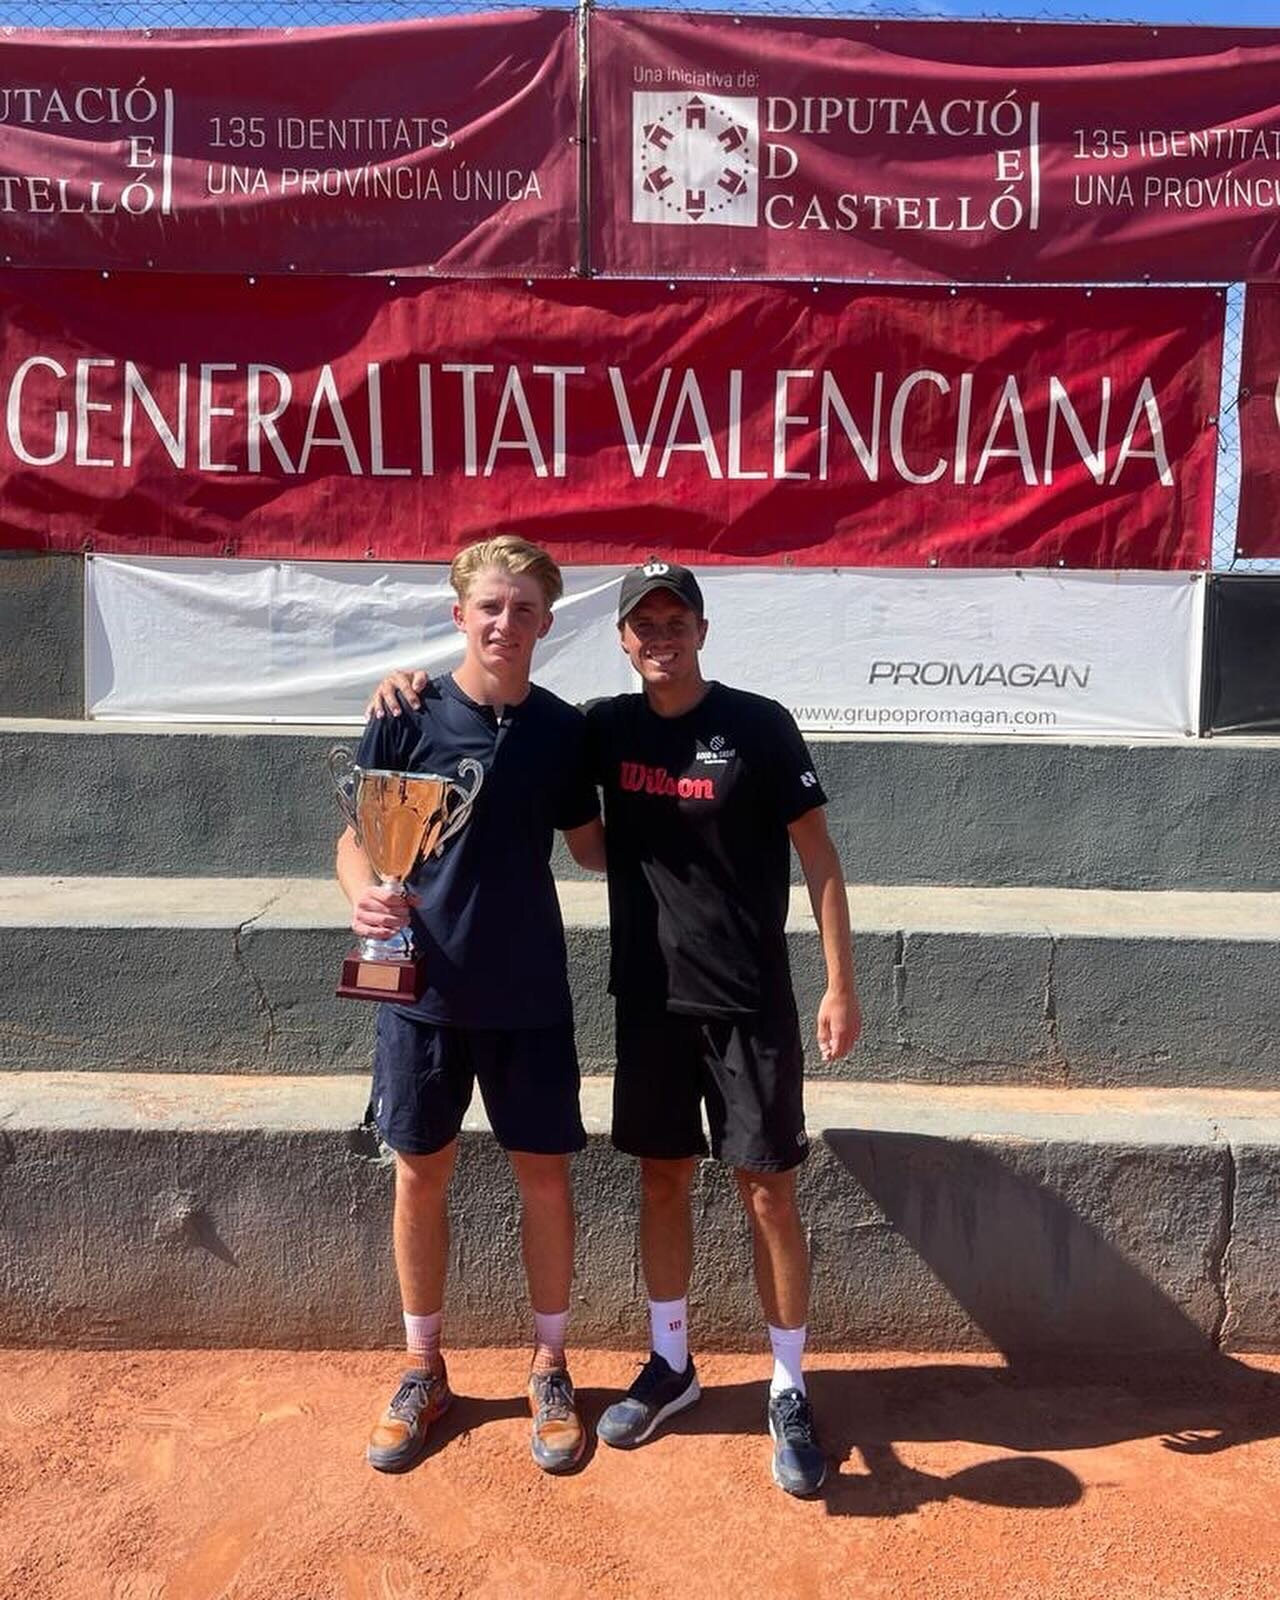 Another fantastic week for our GTG players on tour!🔥

🏆 Ludvig Hede won his first J200 Title in Benicarlo, Spain. Ludvig defeated Swiss player Flynn Thomas in the final with 6-4 6-3. Congratulations on a successful week in Spain!

🏆 Laura Rahnel w